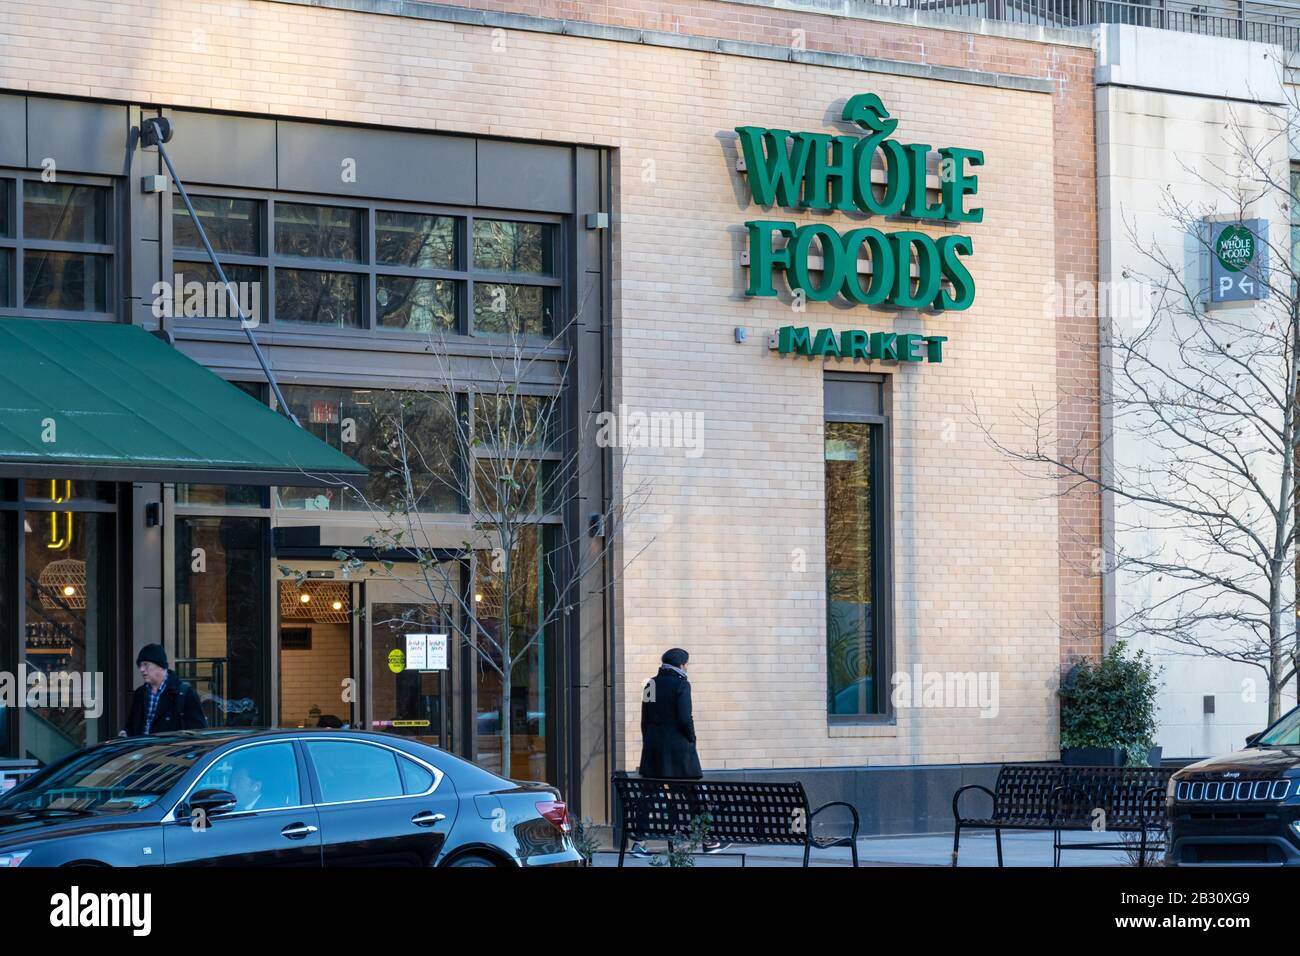 Whole Foods Market sign at an entrance to the popular supermarket chain as a customer walks out. Stock Photo